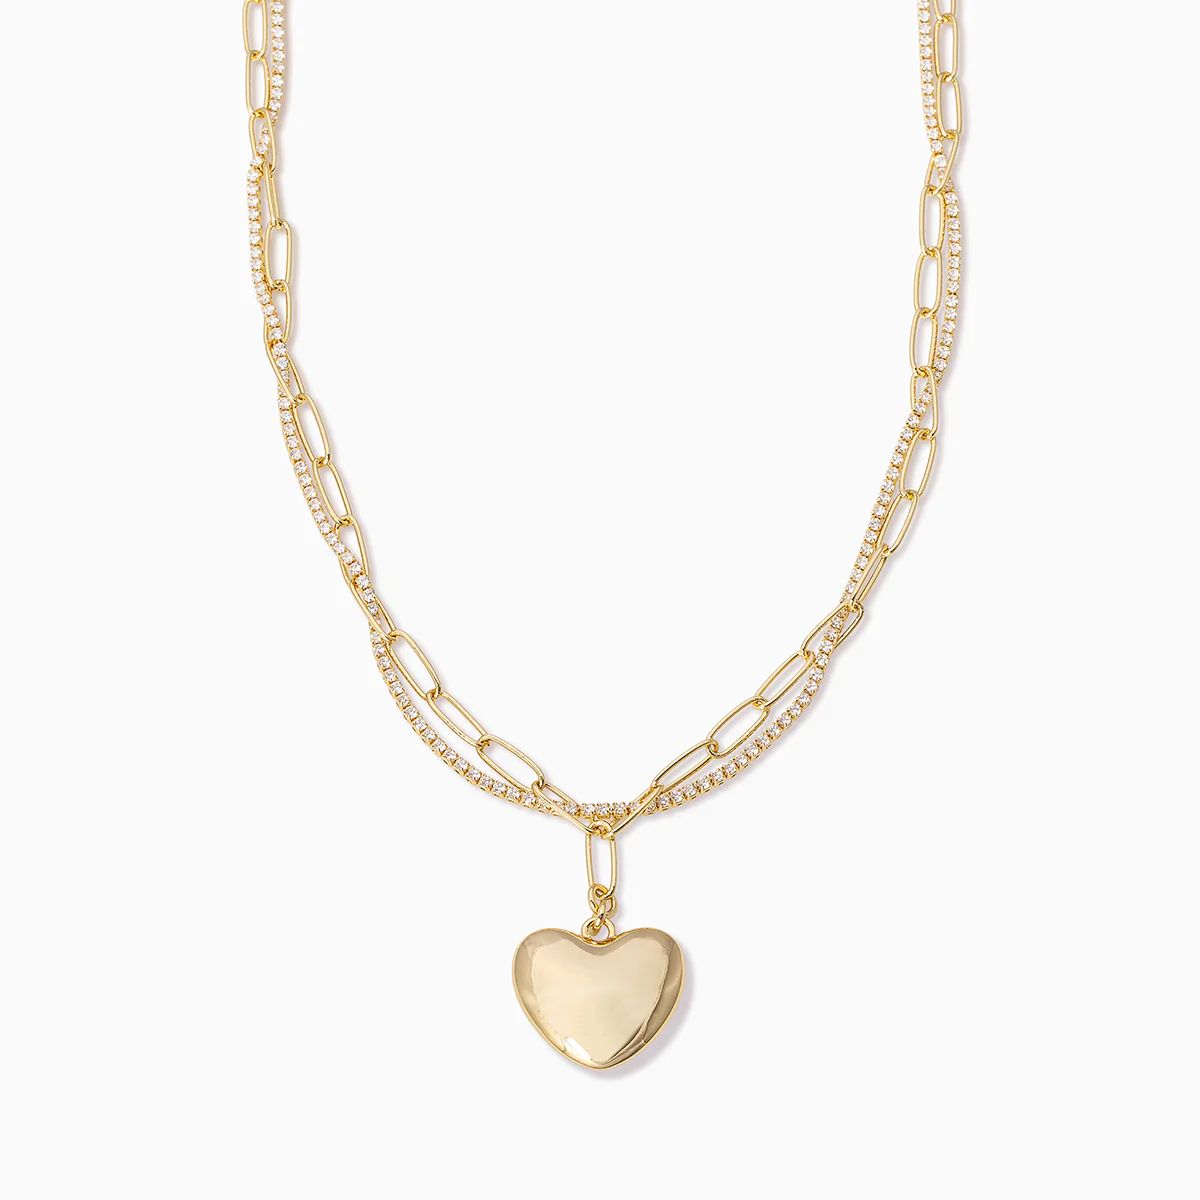 Intertwined Chain and Heart Necklace | Uncommon James